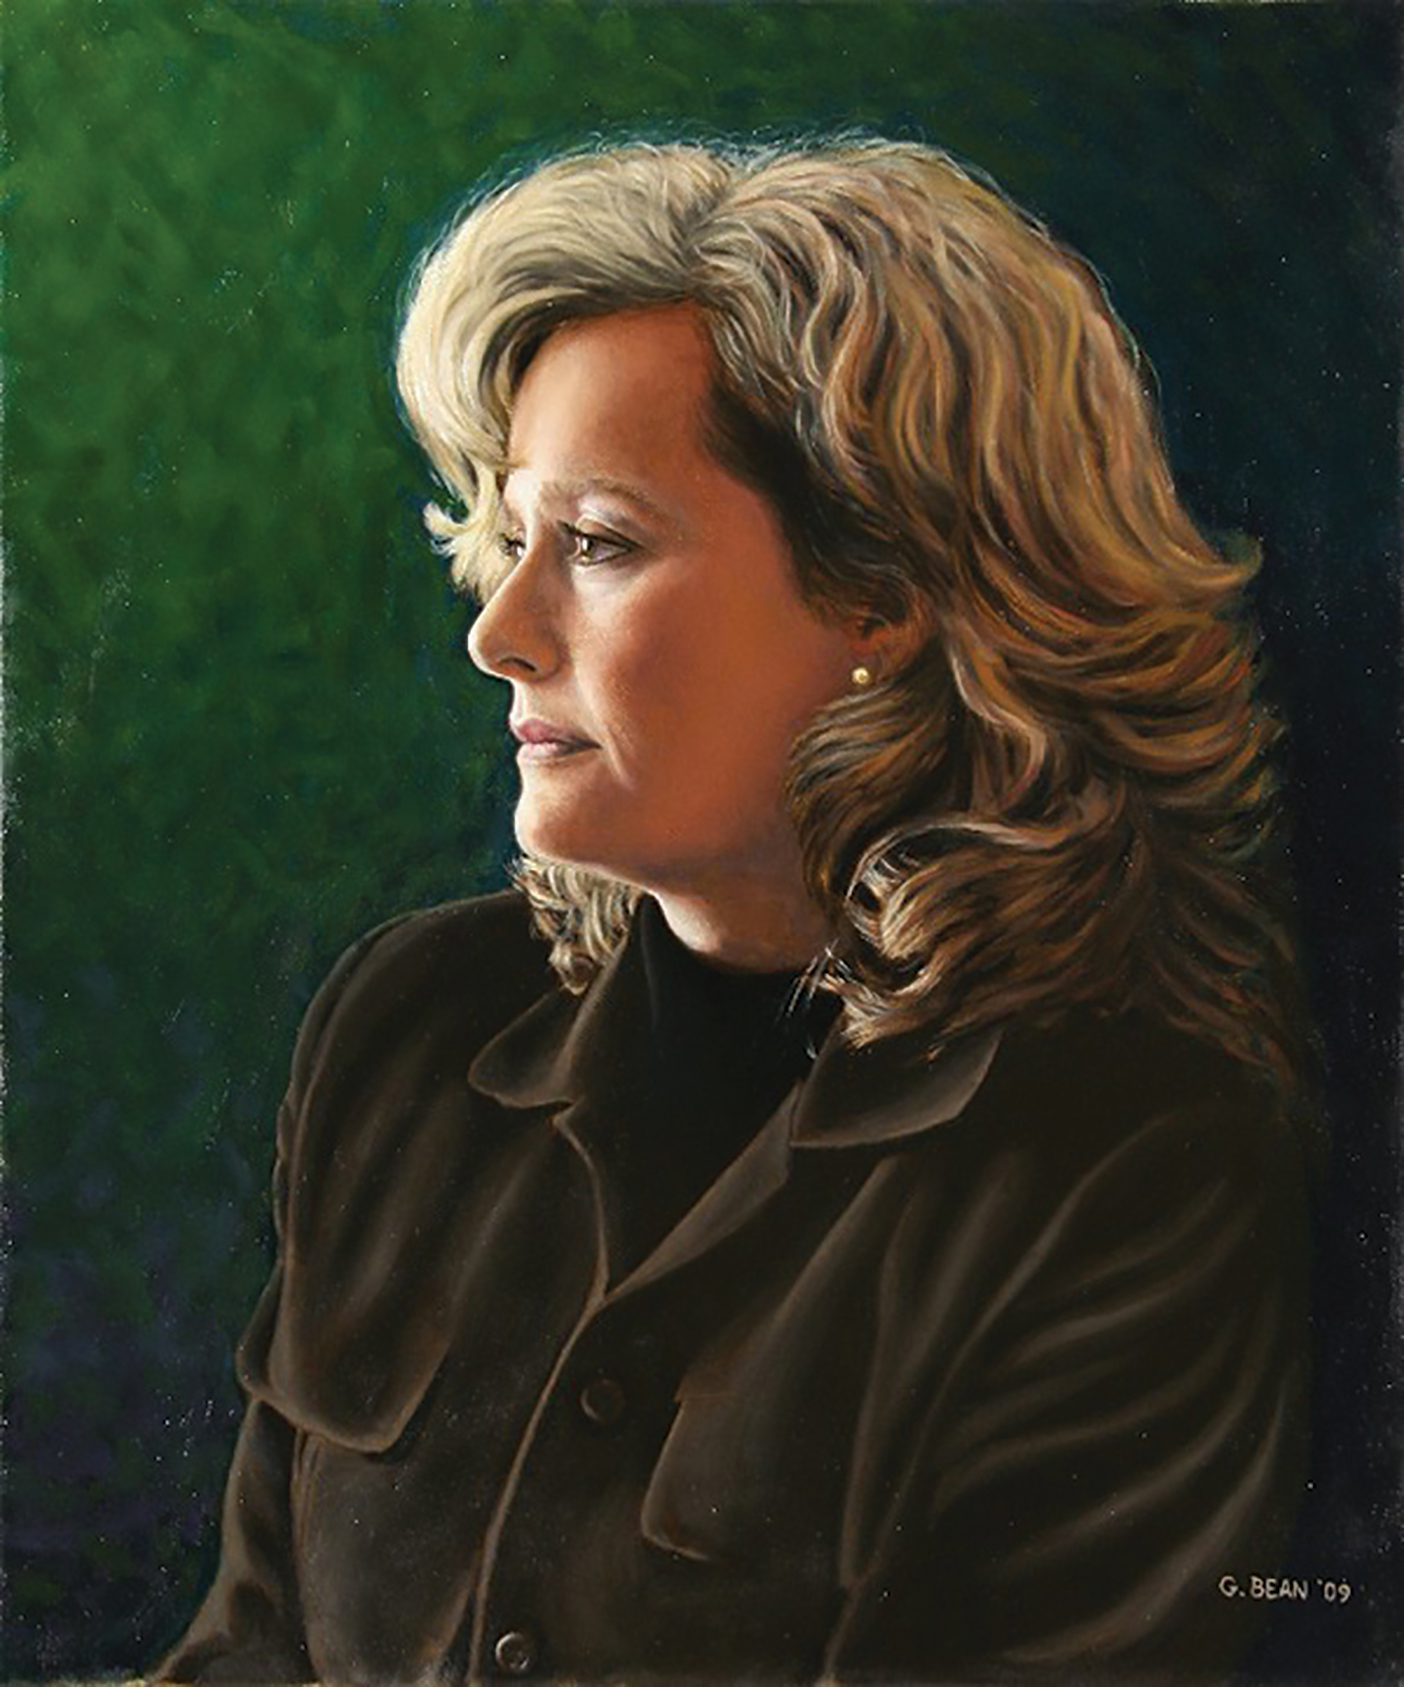 Greg Bean paints his wife, Jean, with oil on canvas.